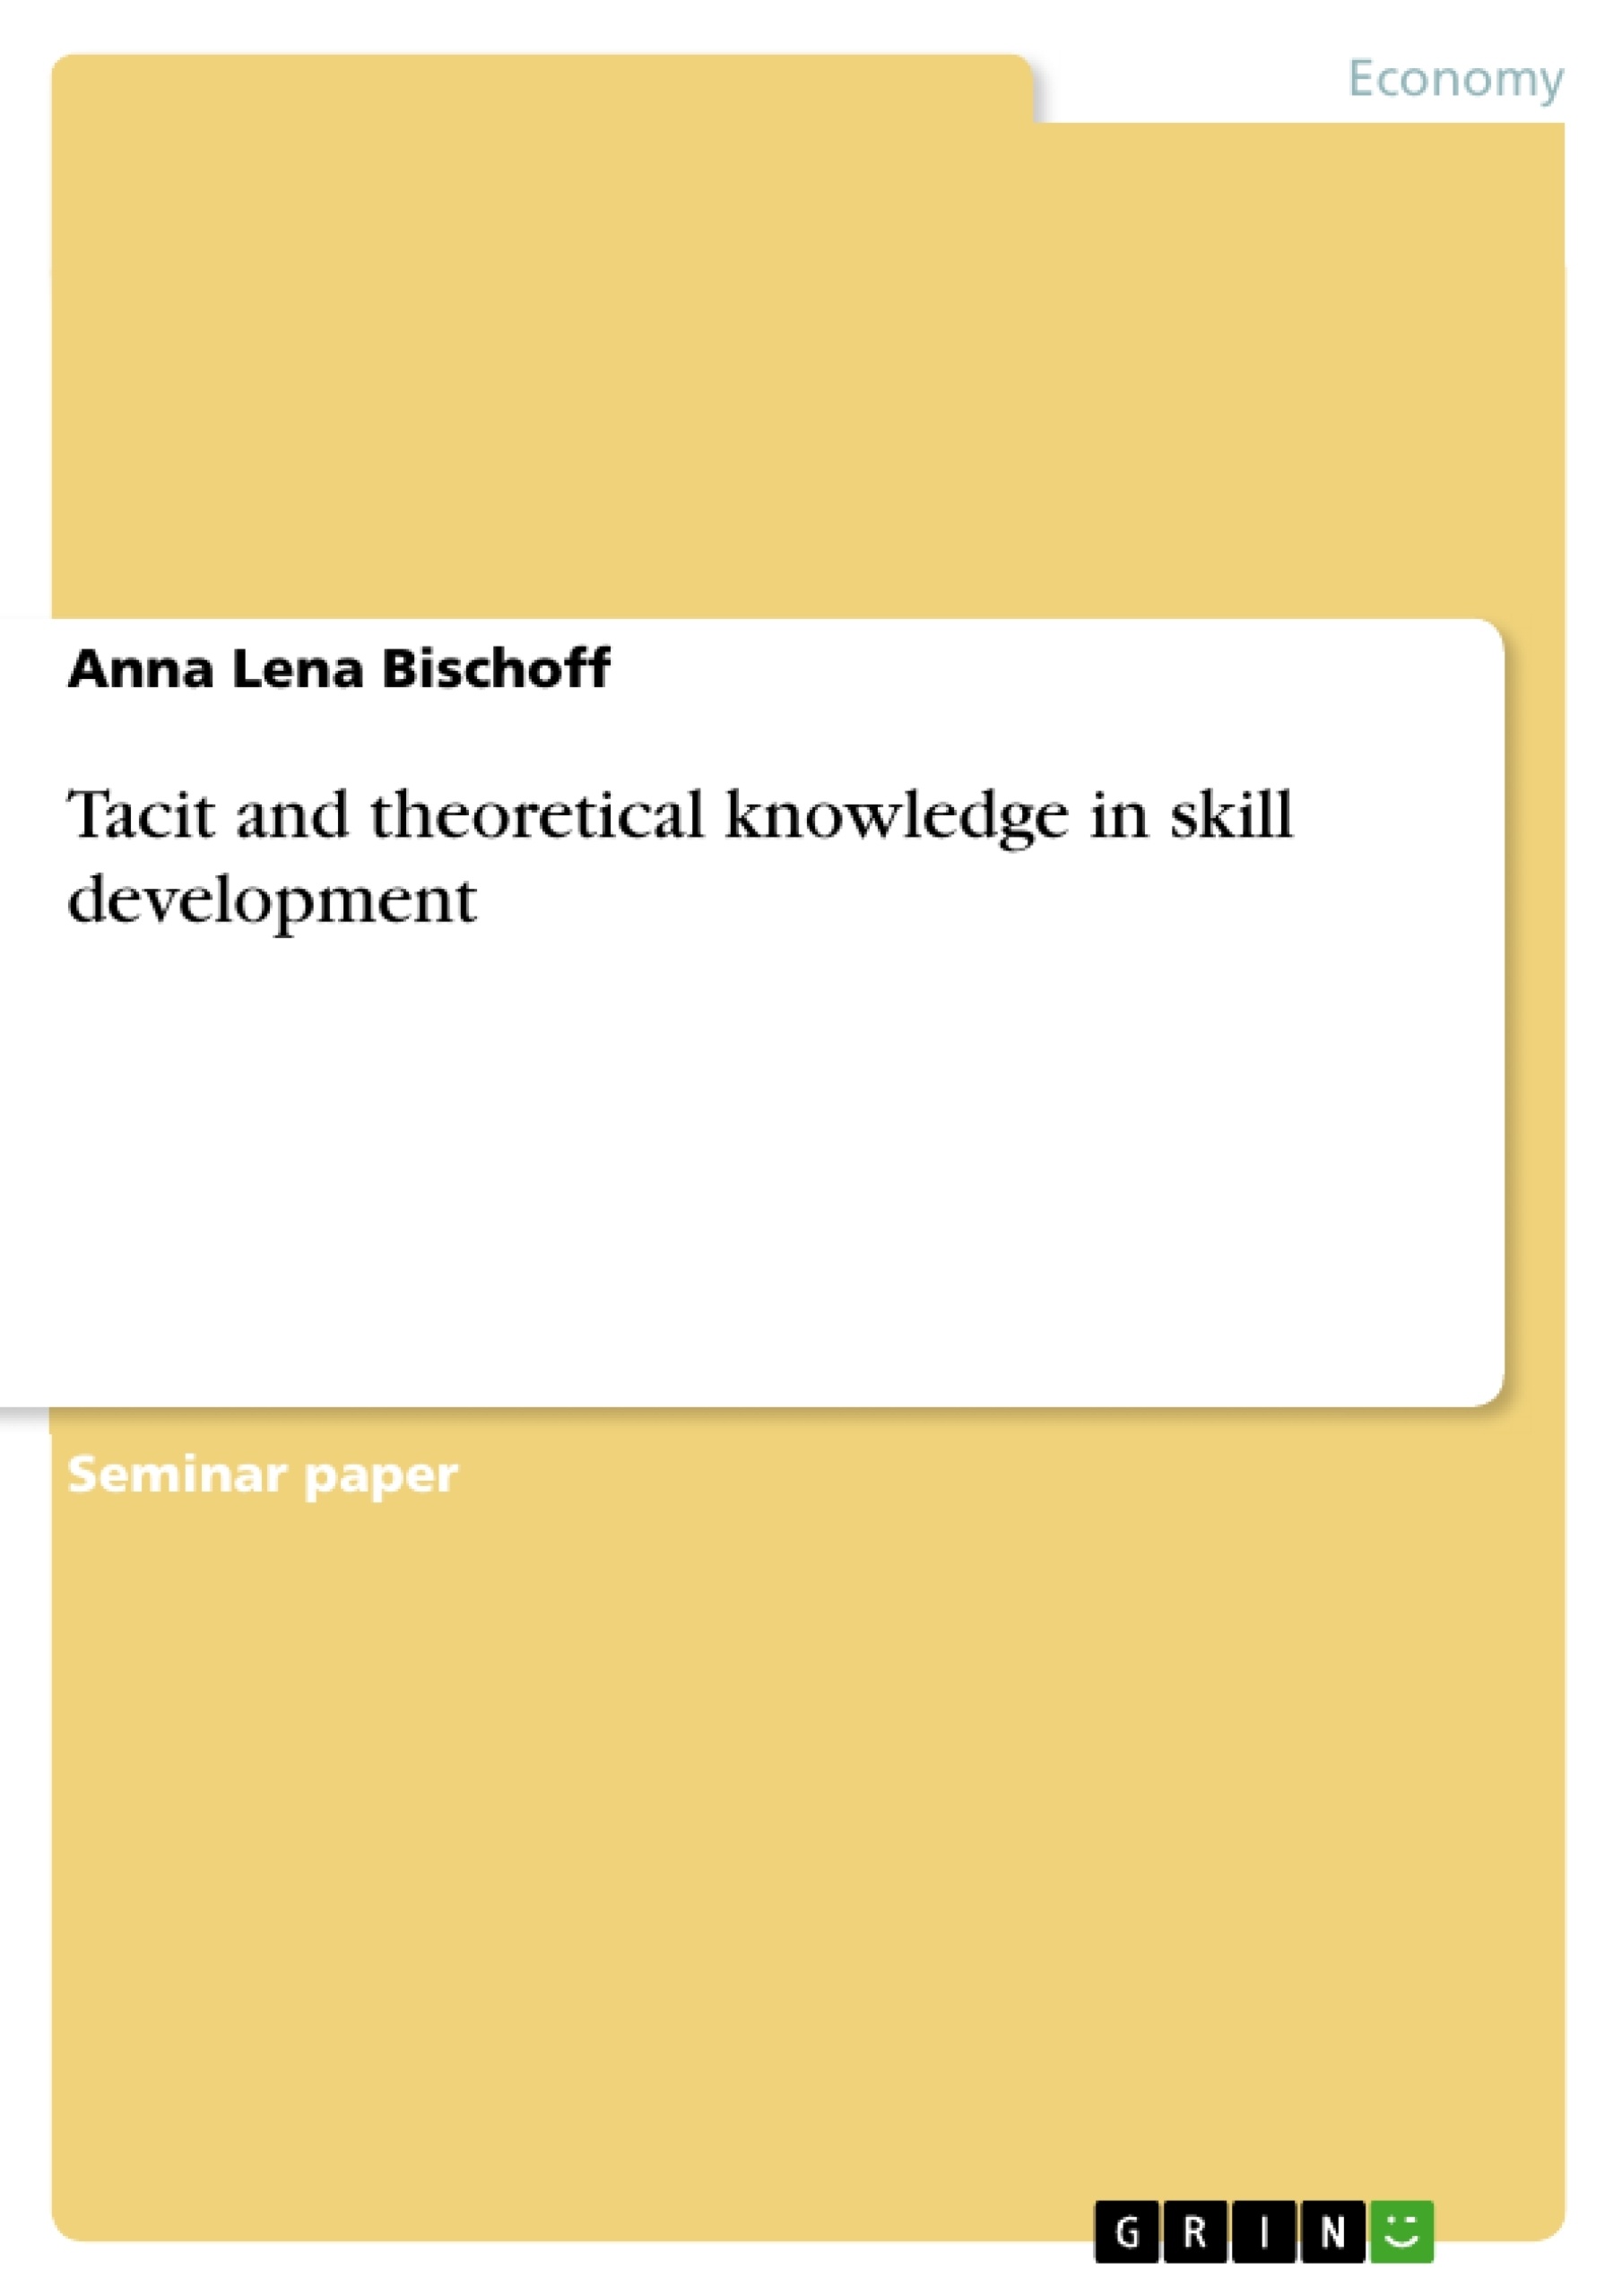 Título: Tacit and theoretical knowledge in skill development